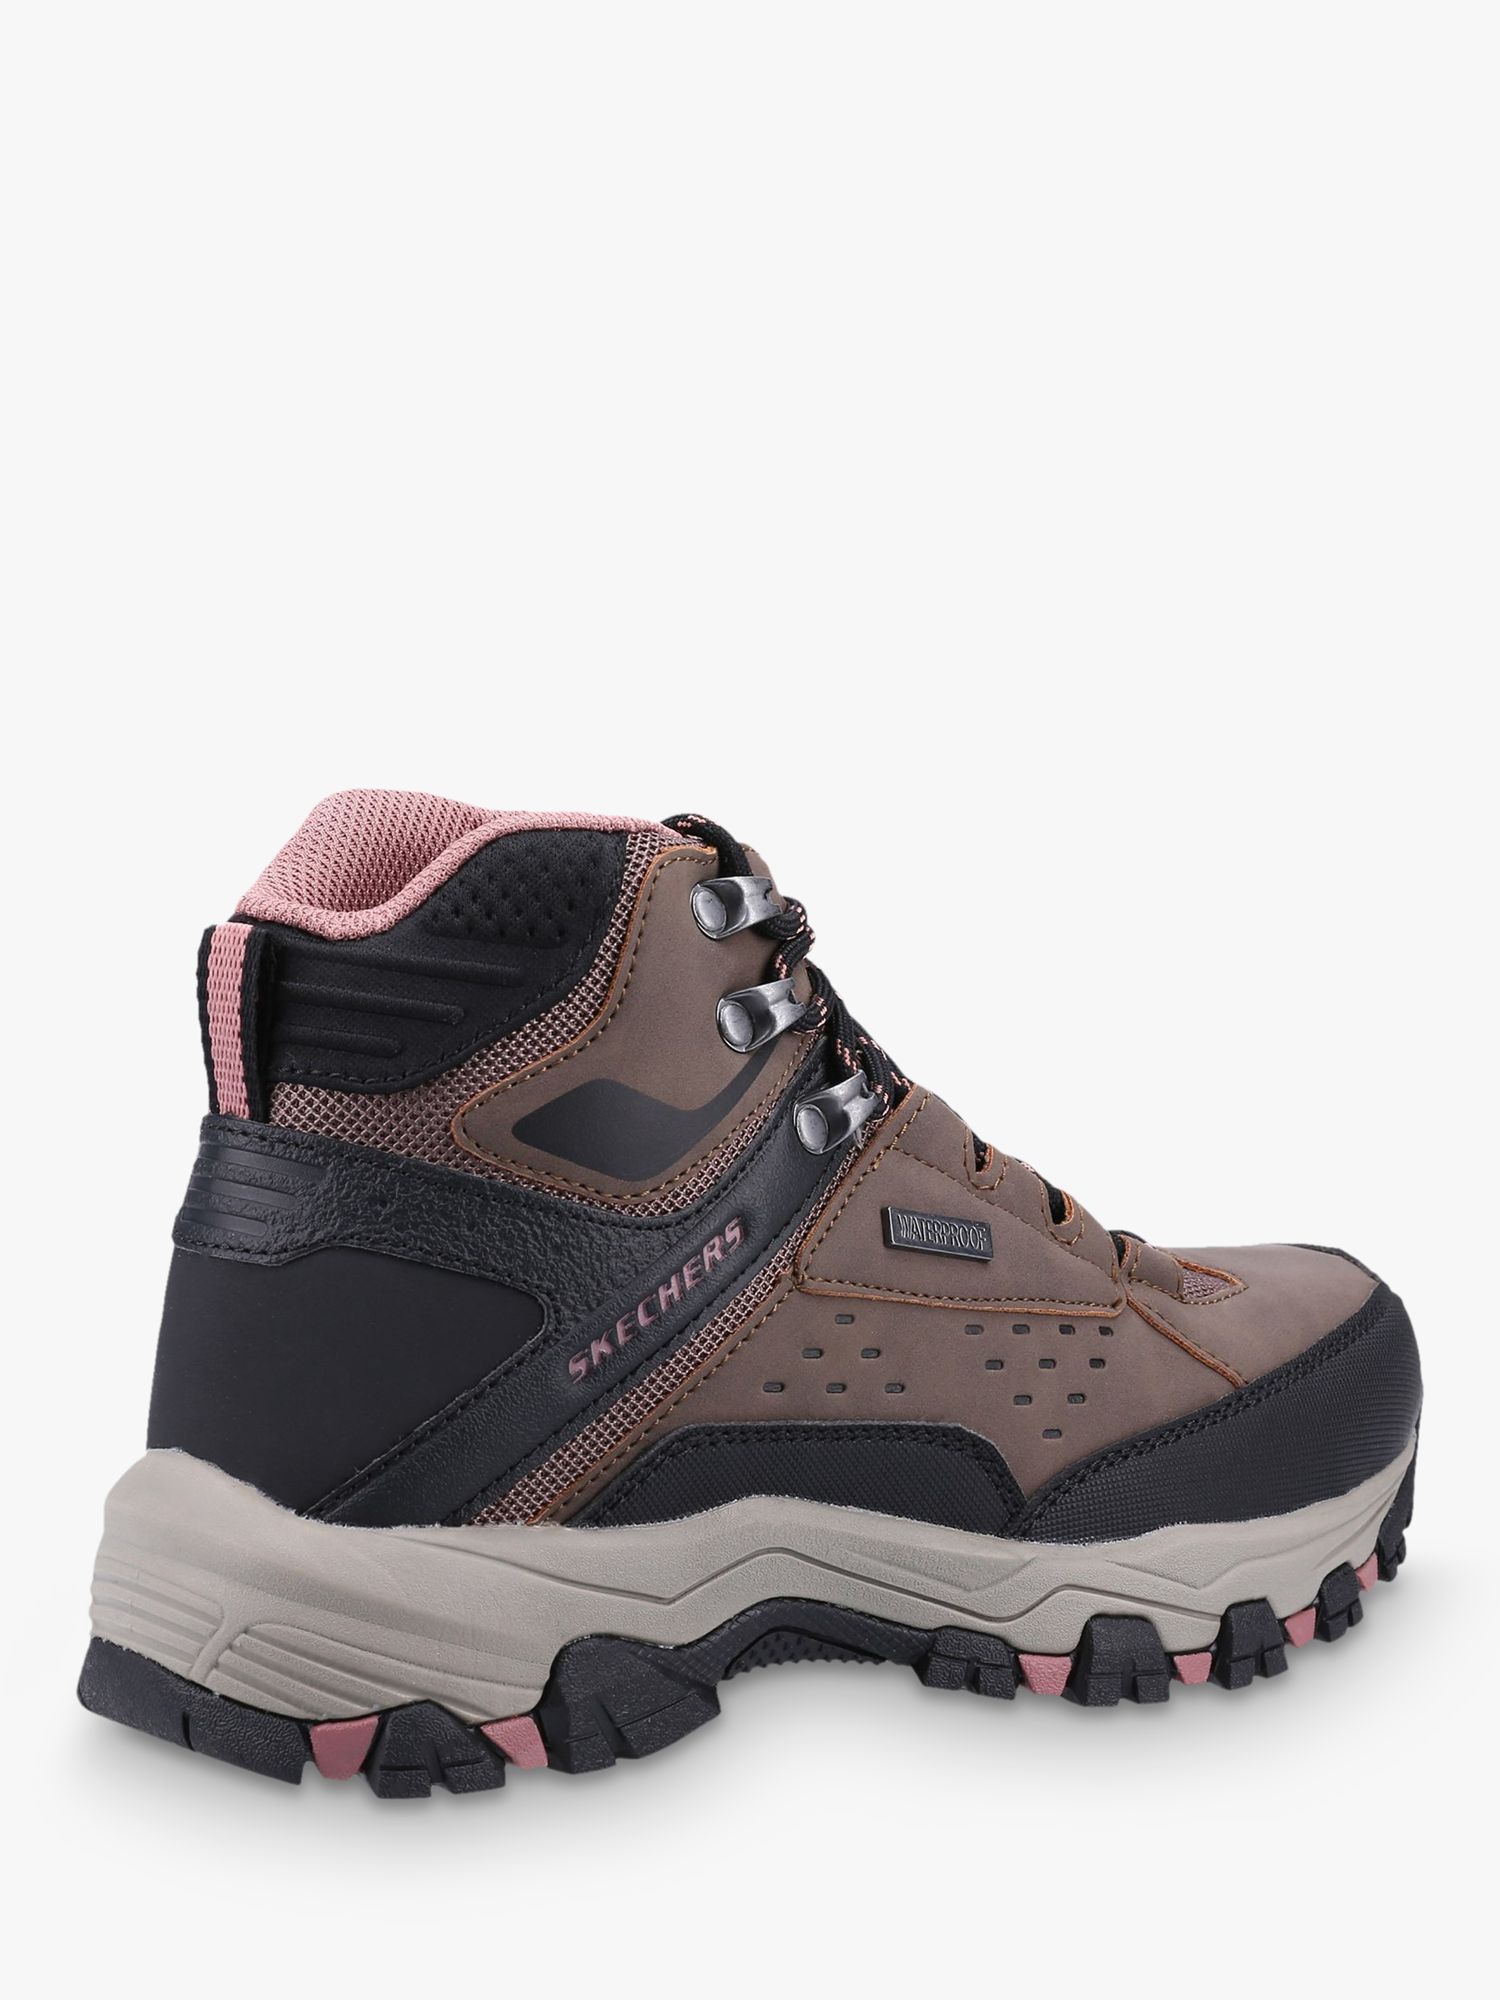 Skechers Relaxed Fit Selmen My Turf Hiking Boots, at John Lewis &